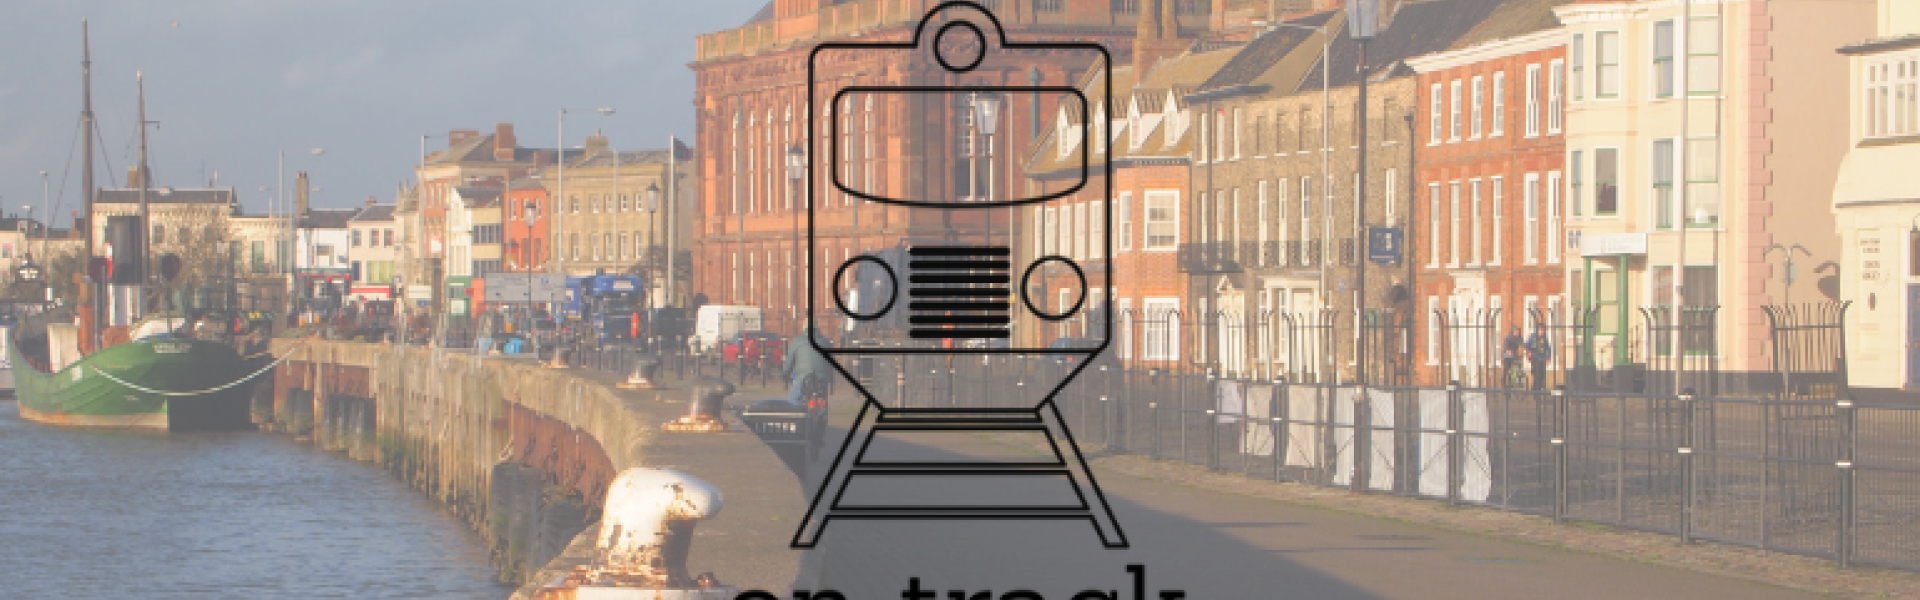 Keep Great Yarmouth on track campaign